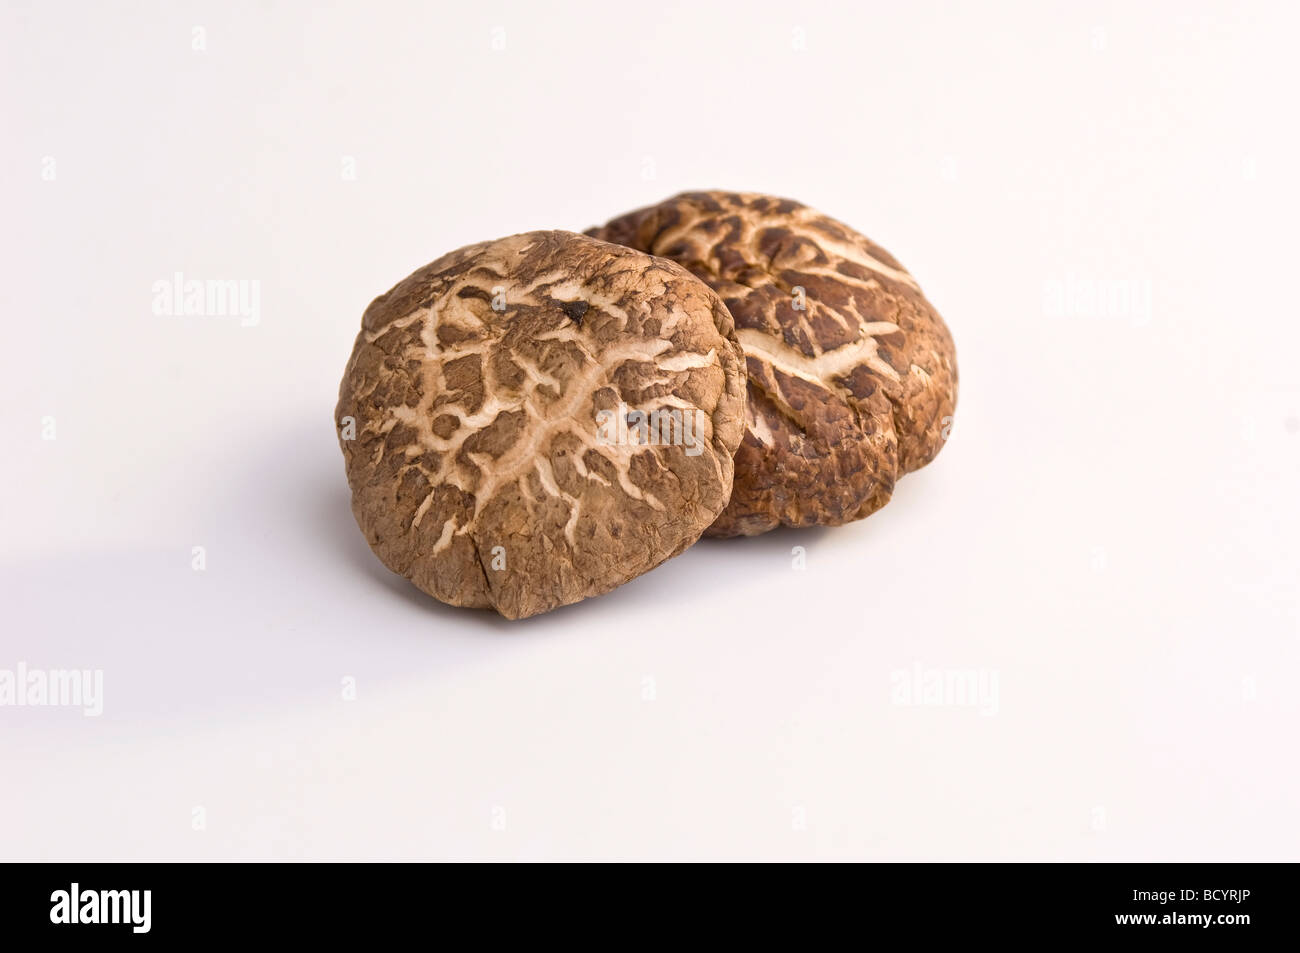 dried Chinese mushrooms on a white background Stock Photo